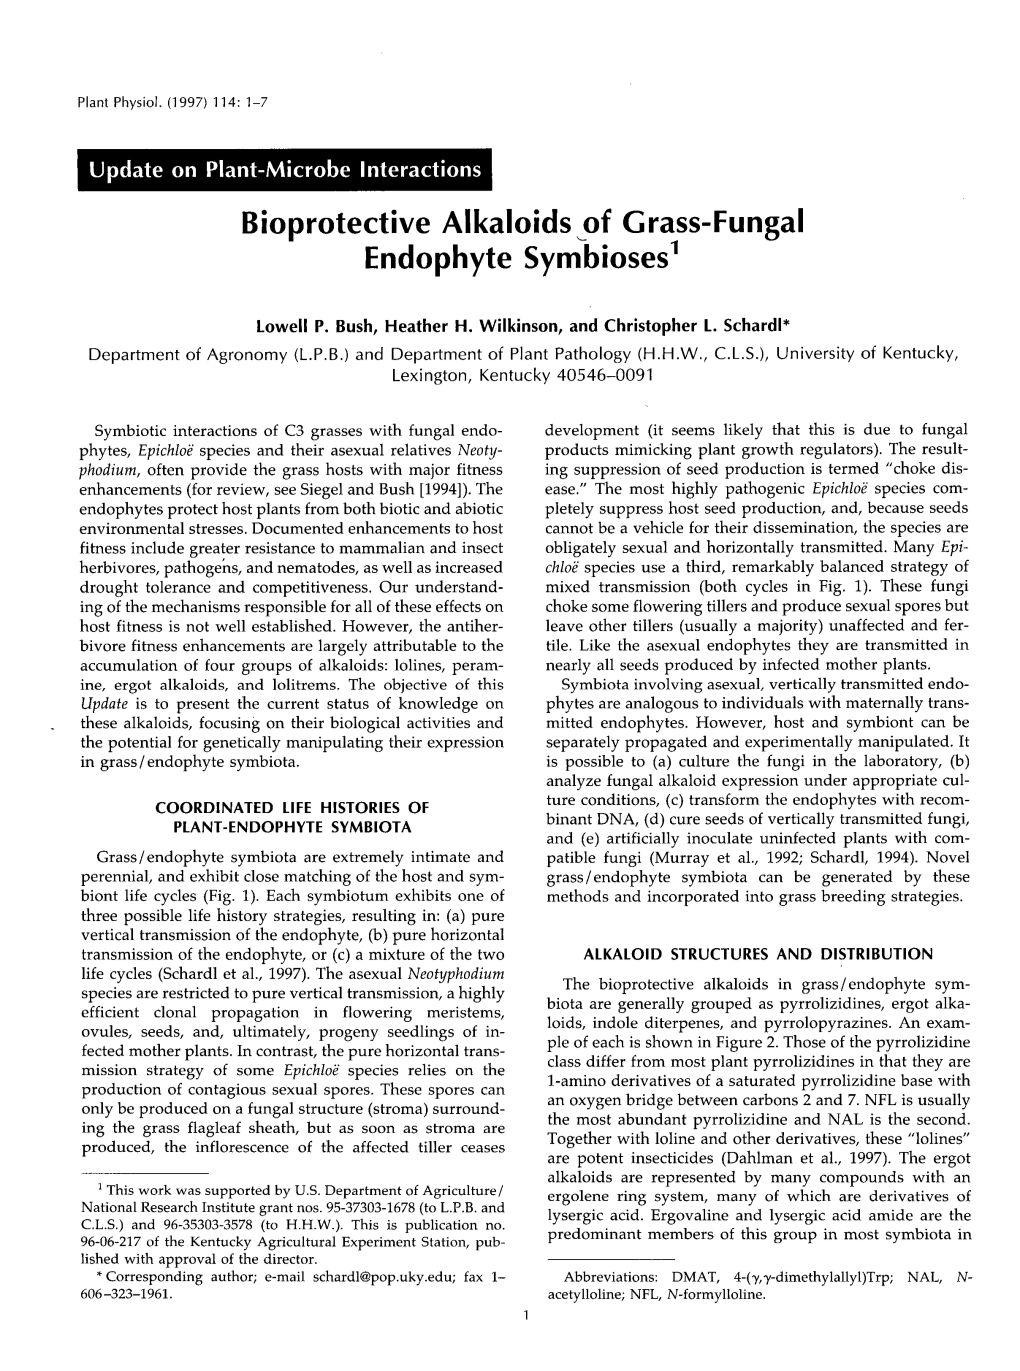 Bioprotective Alkaloids of Grass-Funga1 Endophyte Symbioses'